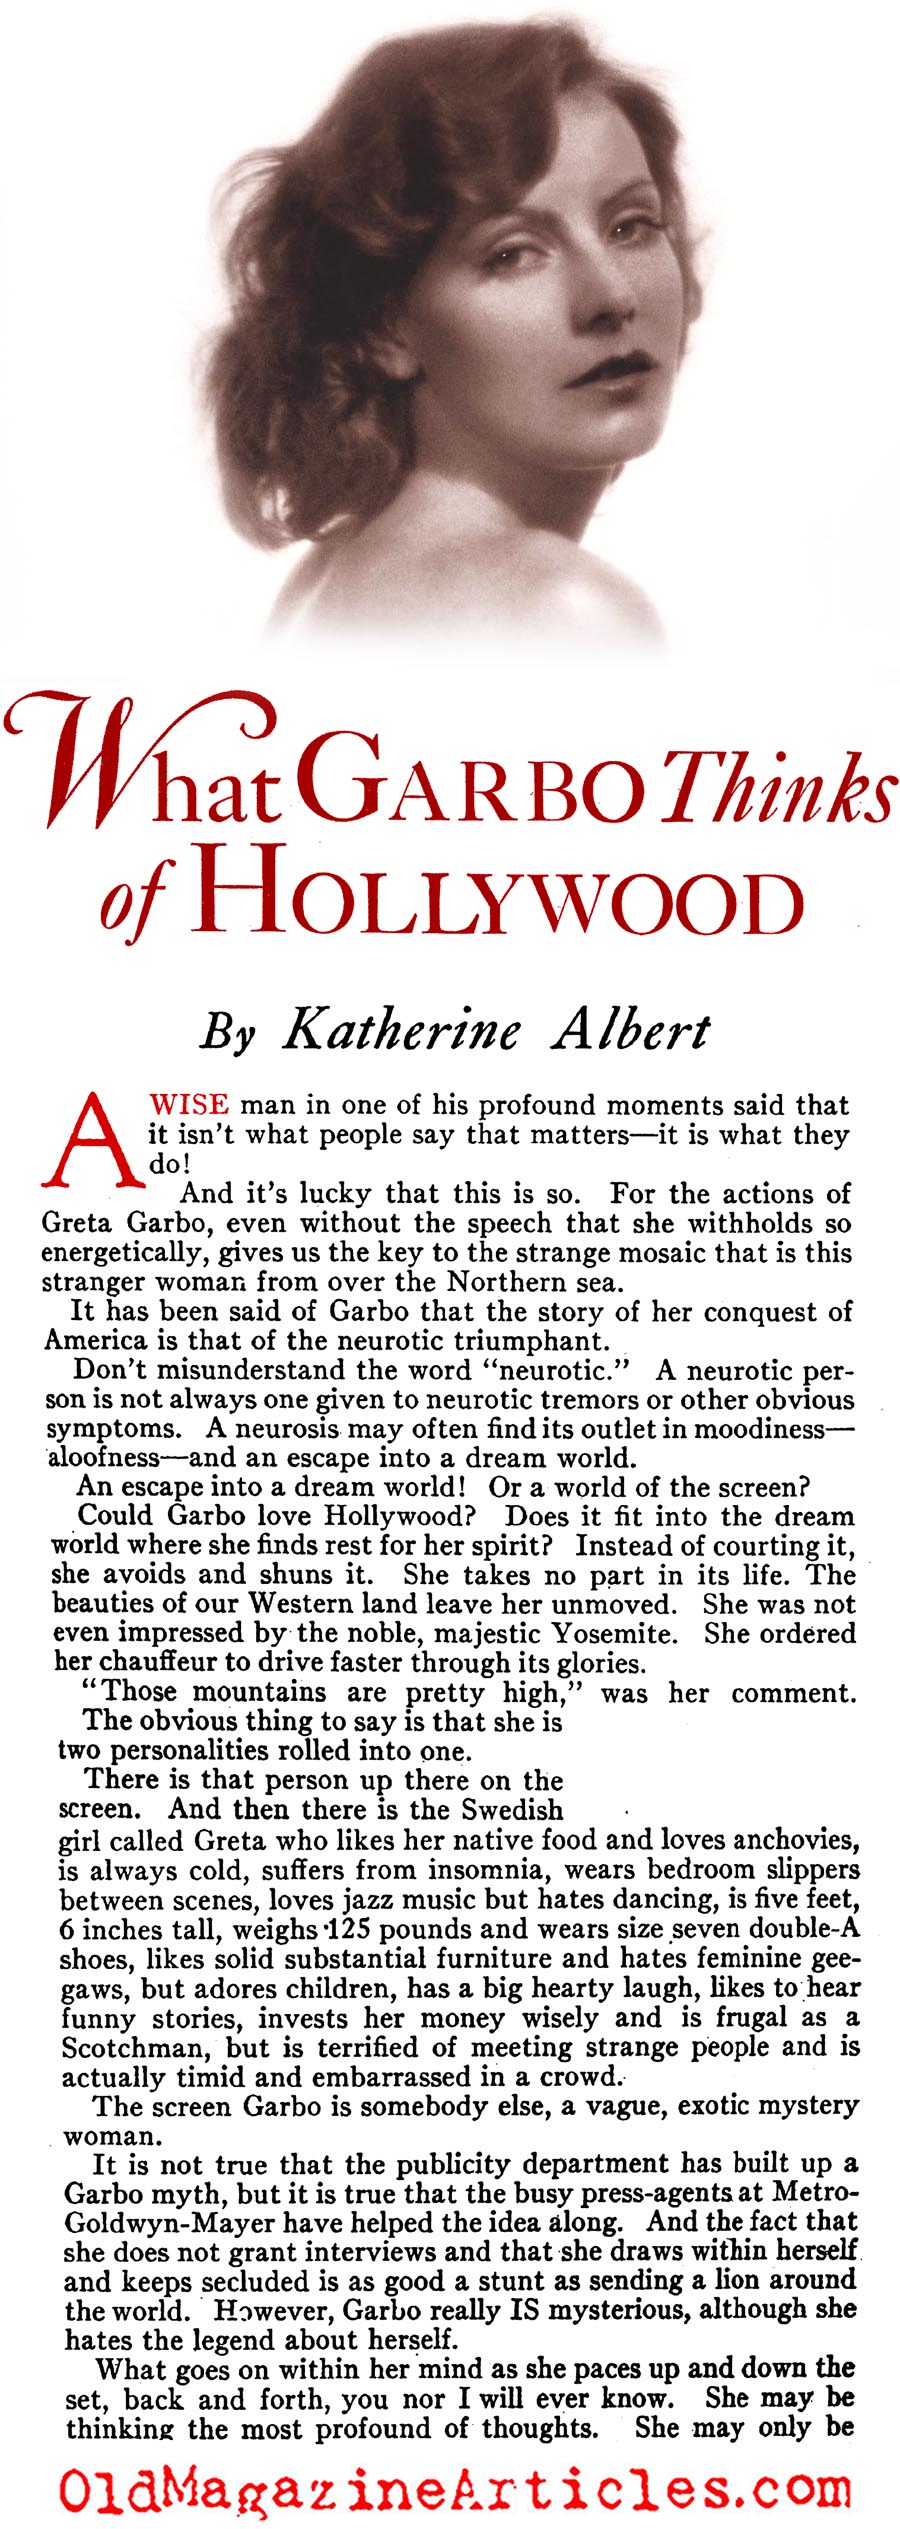 Greta Garbo's First Impressions of Hollywood (Photoplay Magazine, 1930)